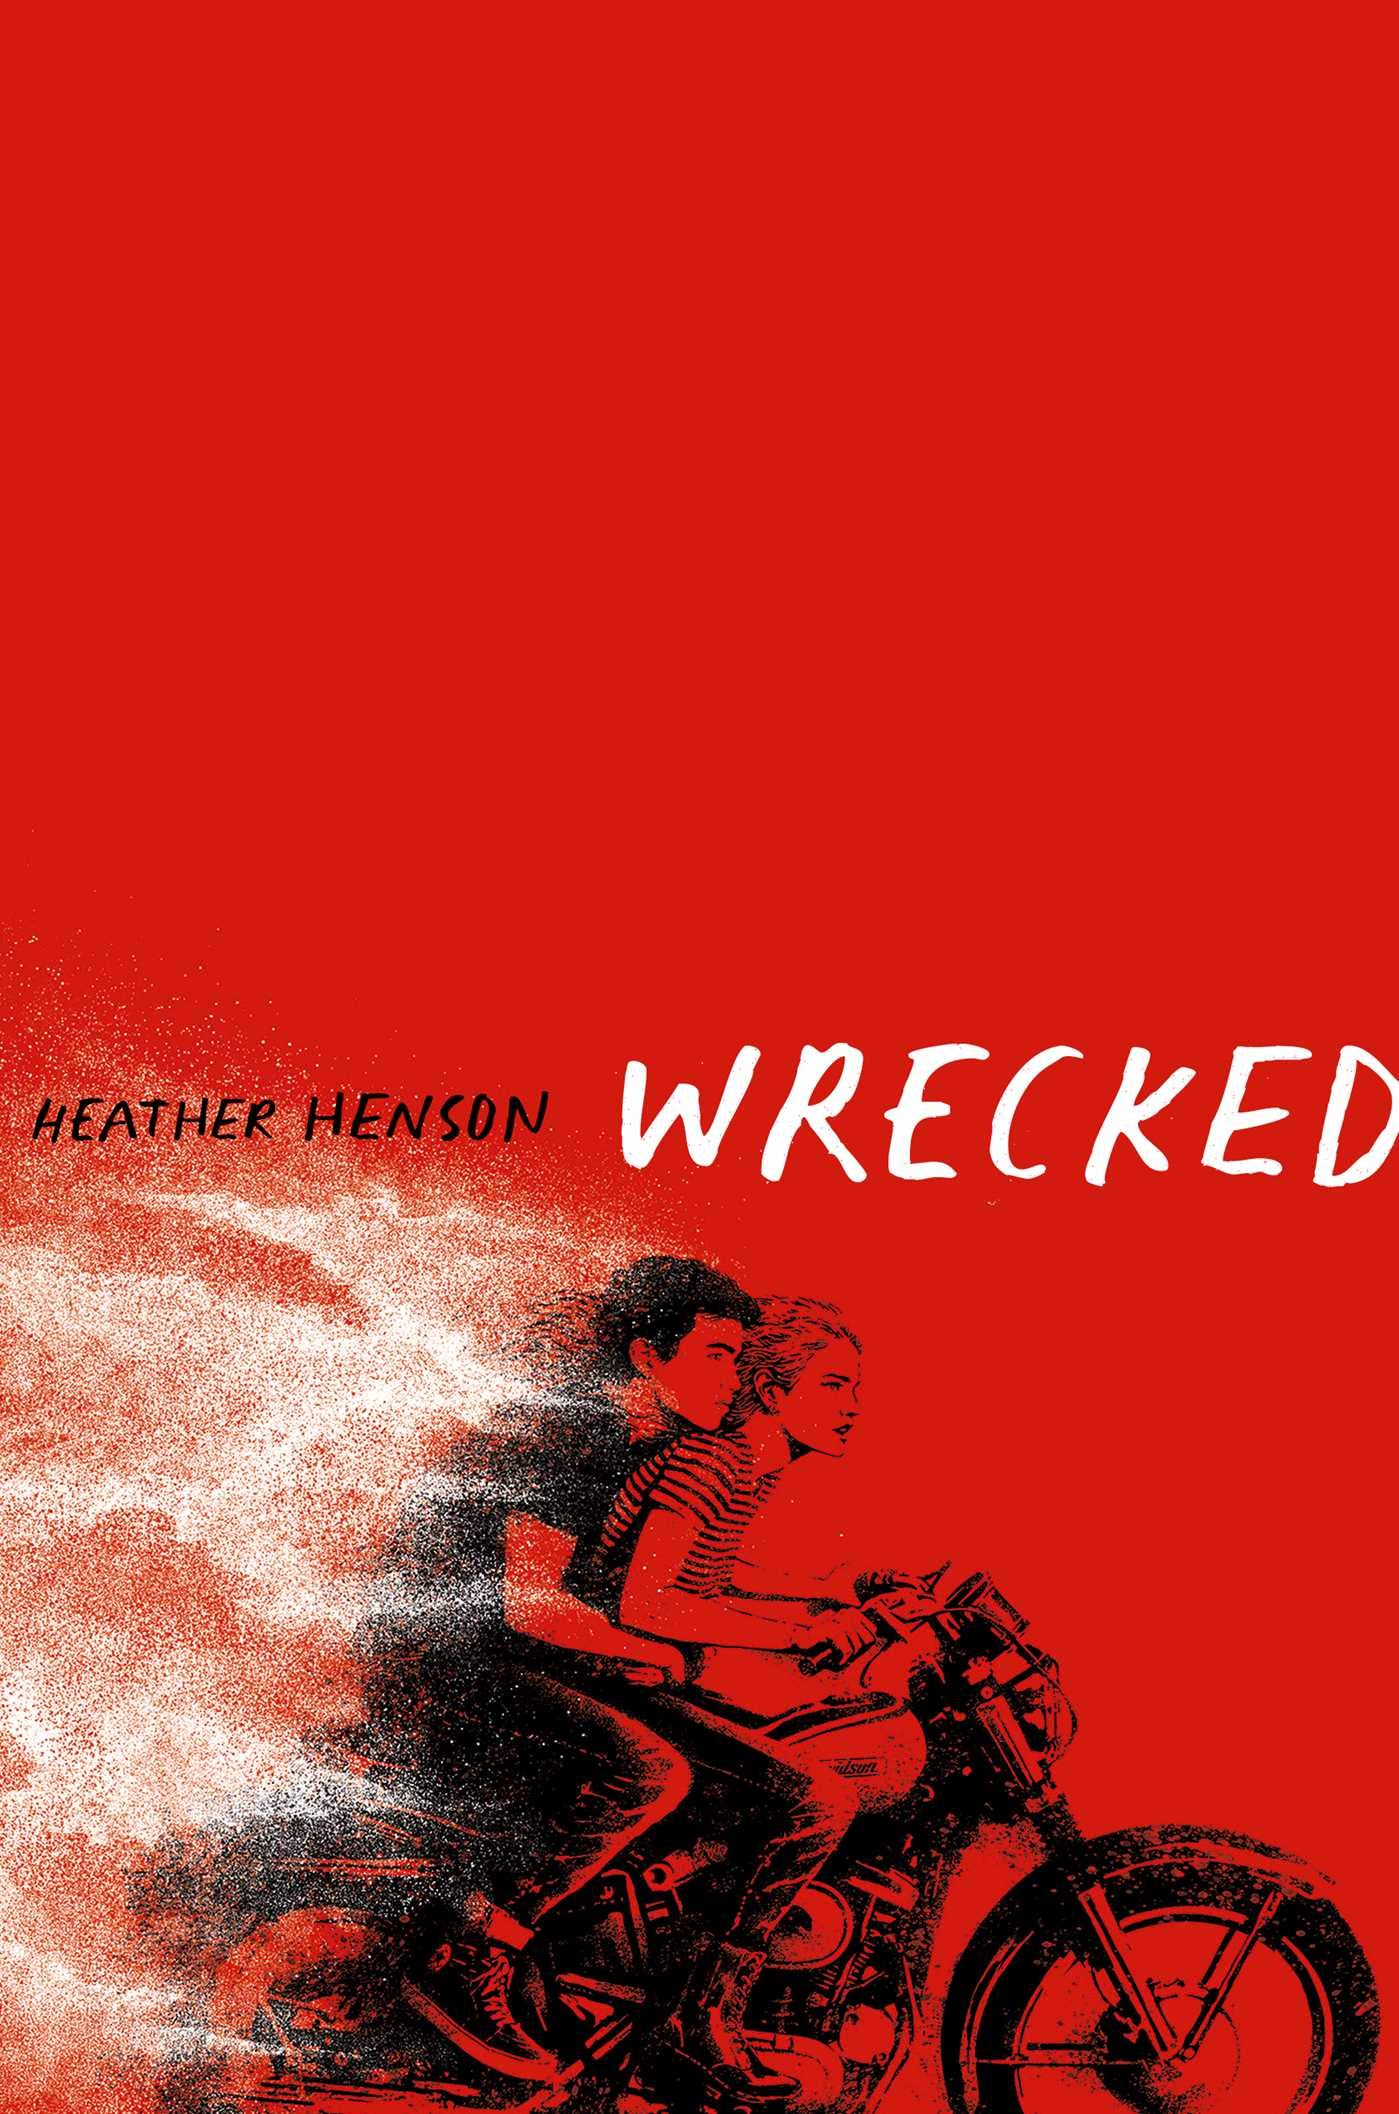 Book cover showing two young people on a motorcycle